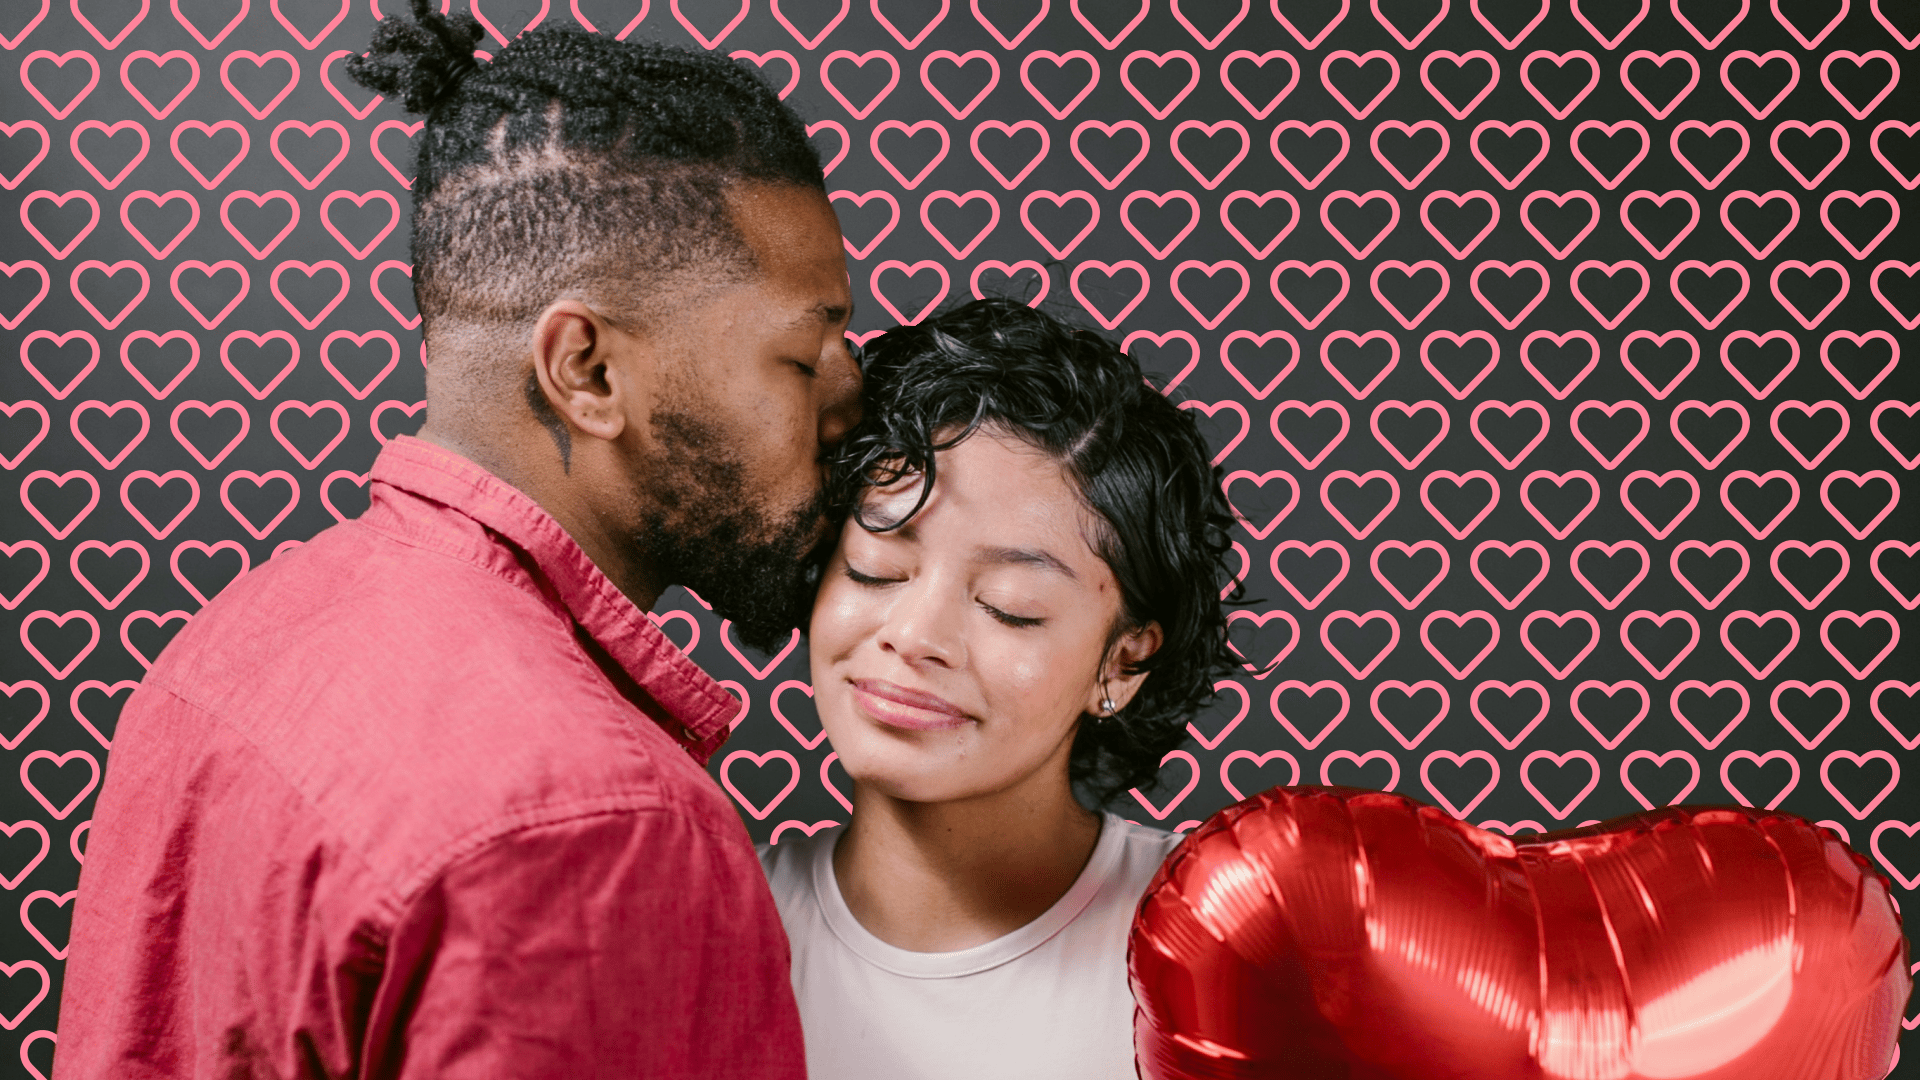 5 Amazing Ideas to Make the Most of Valentine's Day at Home